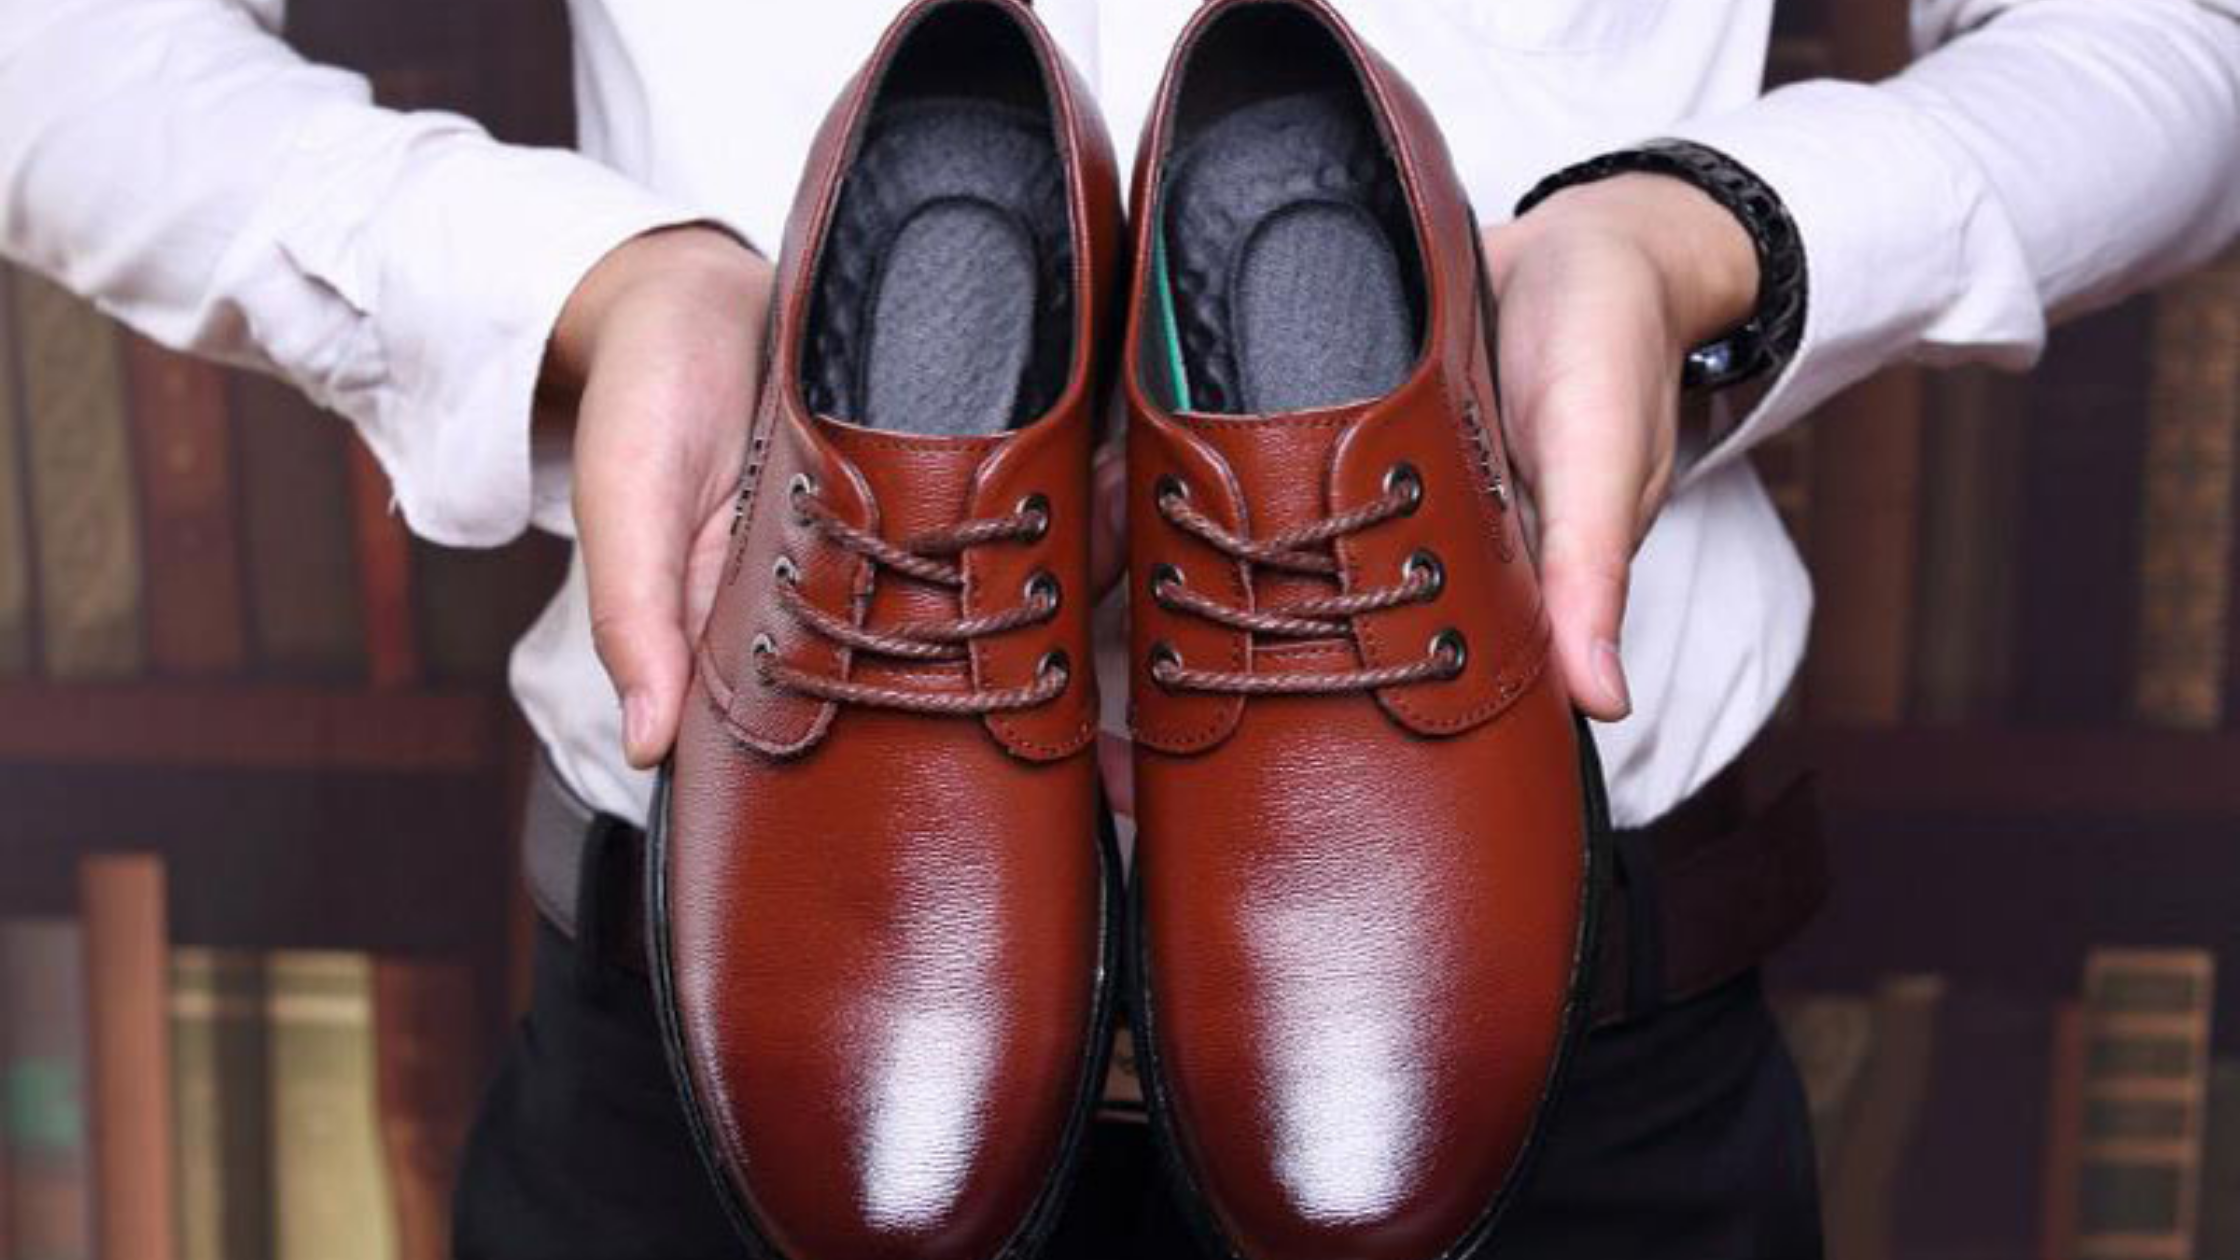 Why is it so important to have shining shoes for the perfect first impression?